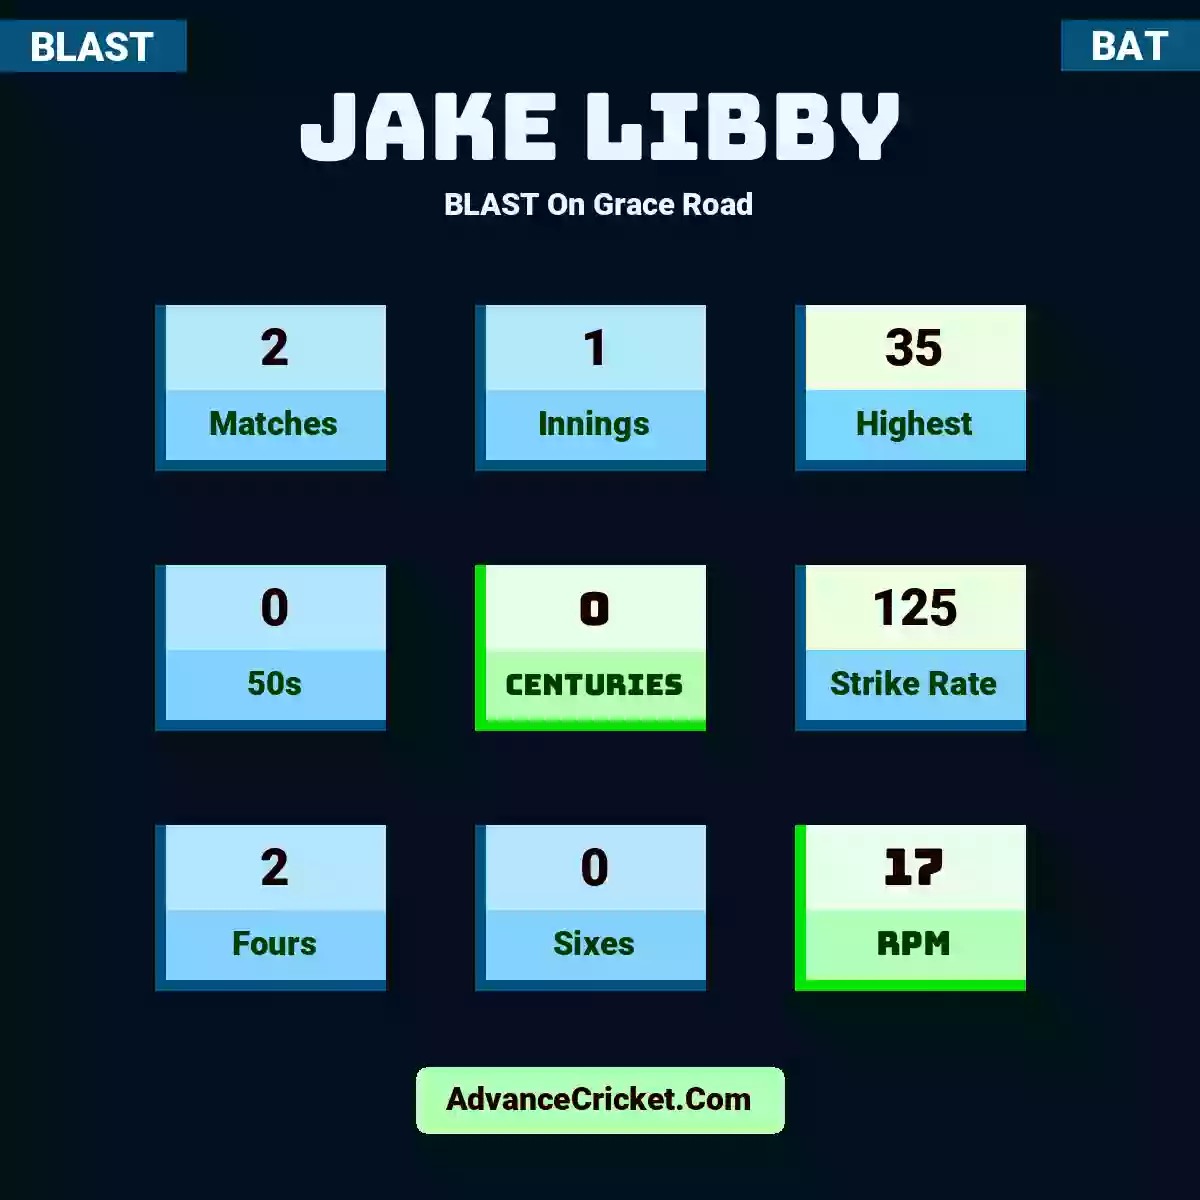 Jake Libby BLAST  On Grace Road, Jake Libby played 2 matches, scored 35 runs as highest, 0 half-centuries, and 0 centuries, with a strike rate of 125. J.Libby hit 2 fours and 0 sixes, with an RPM of 17.